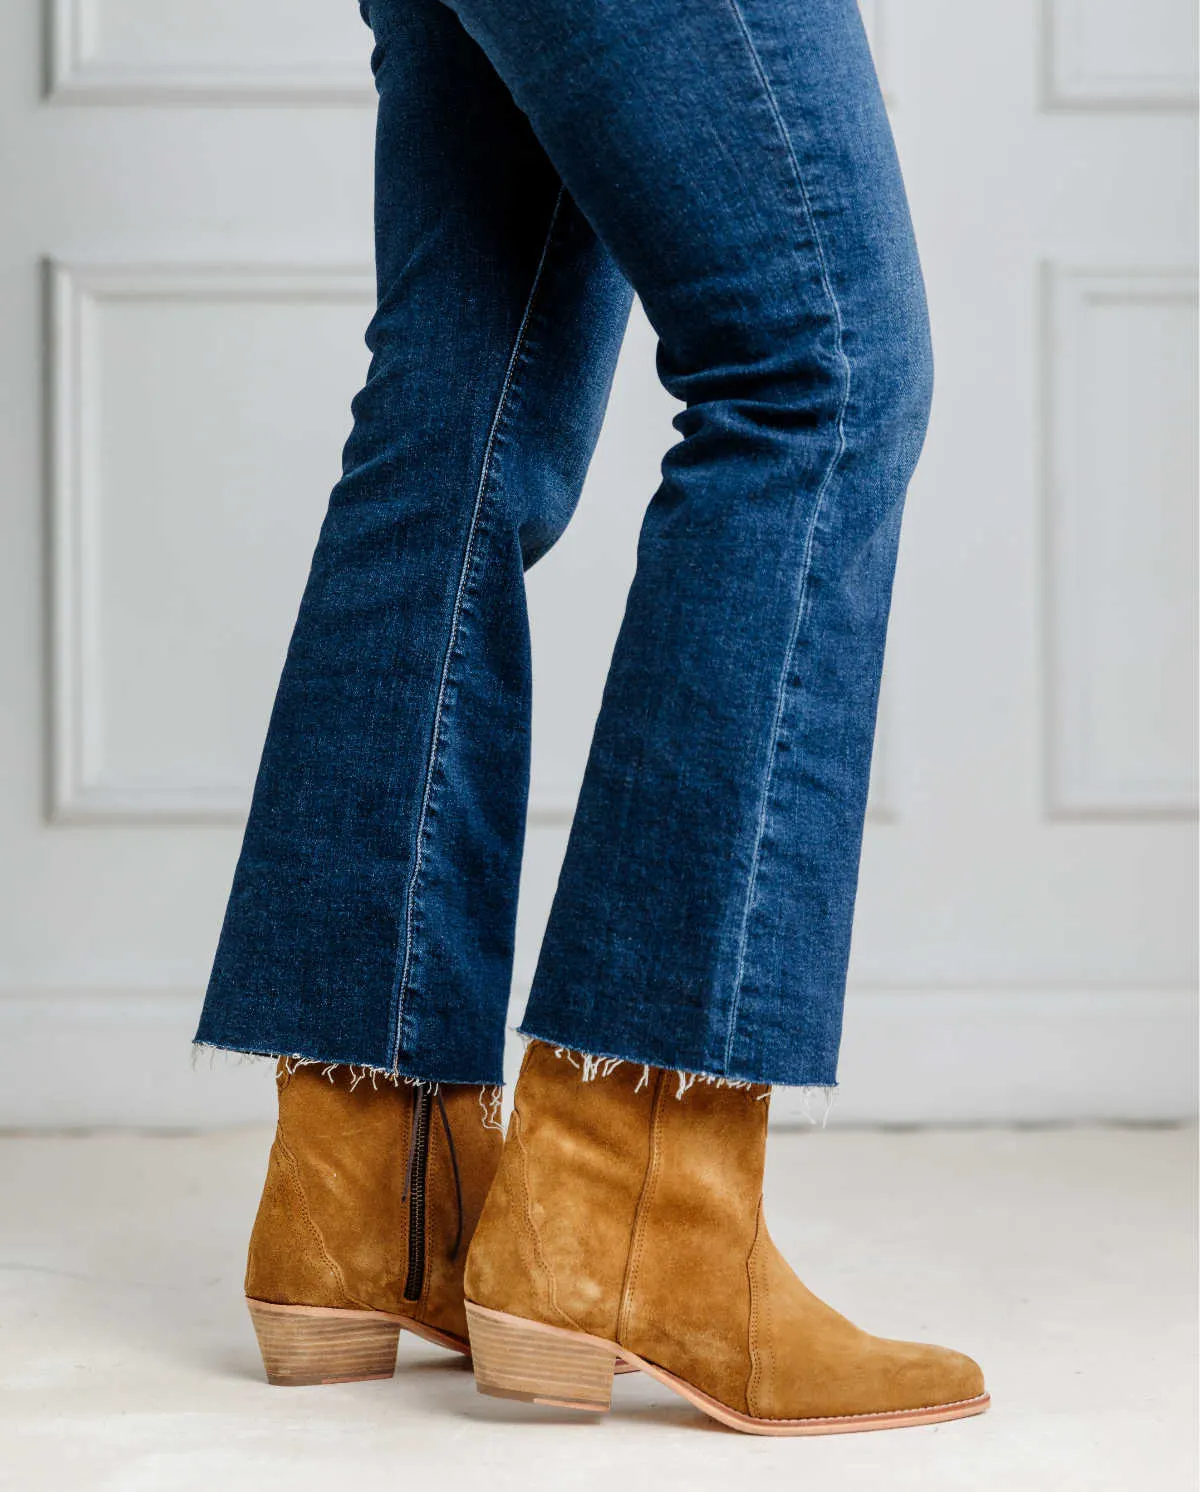 Cropped view of woman's legs wearing kick flares and western boots.